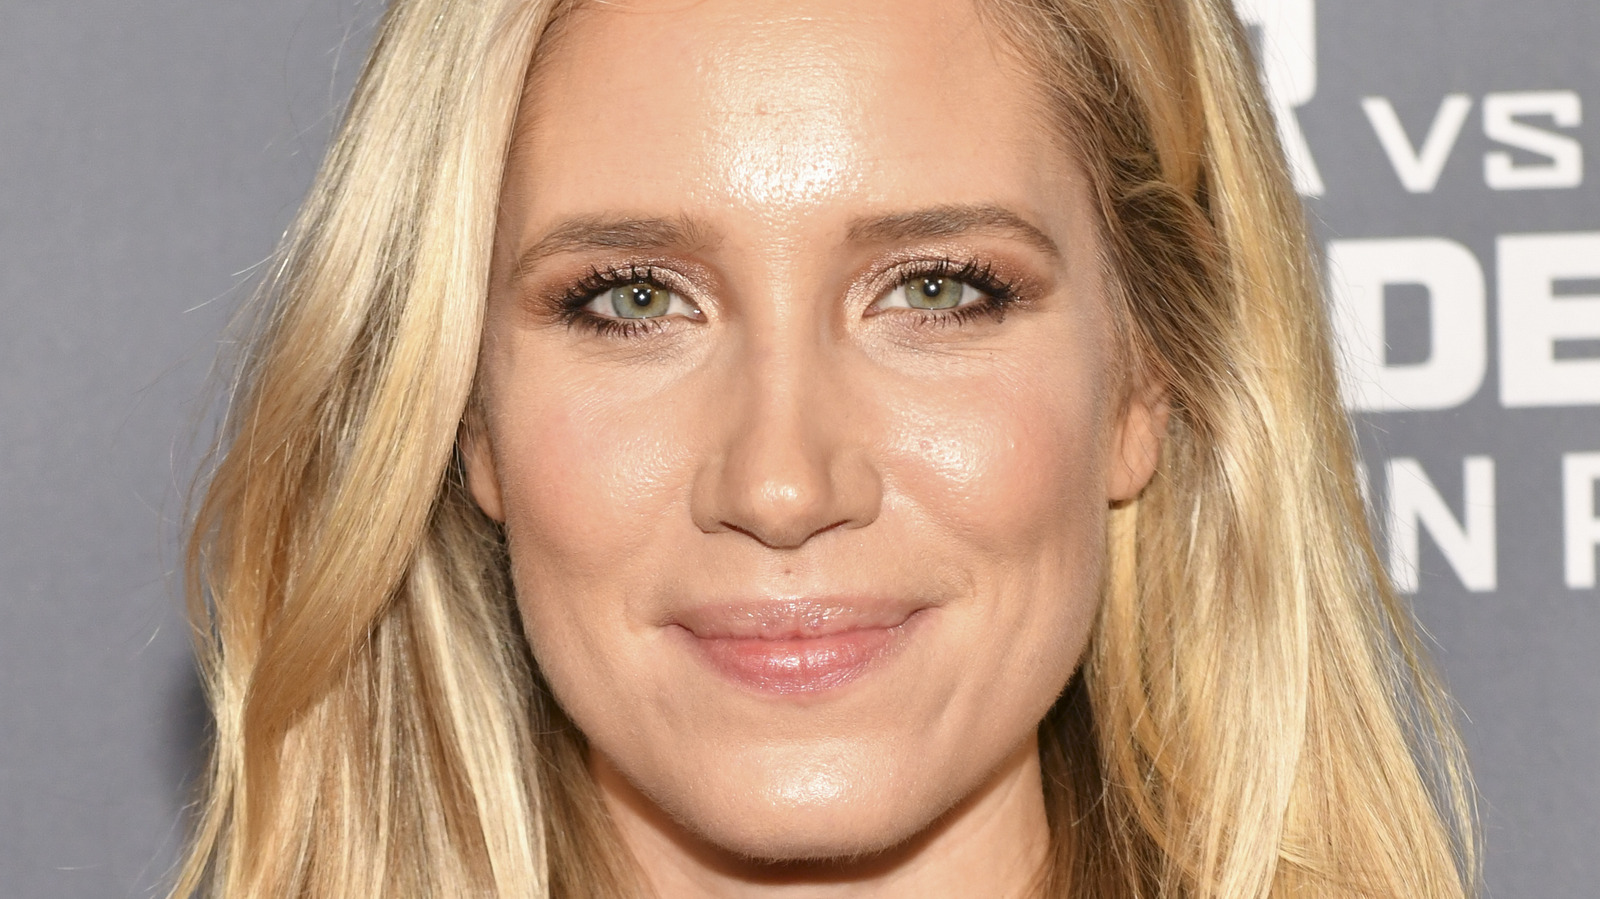 Here’s What Kristine Leahy Looks Like Going Makeup-Free